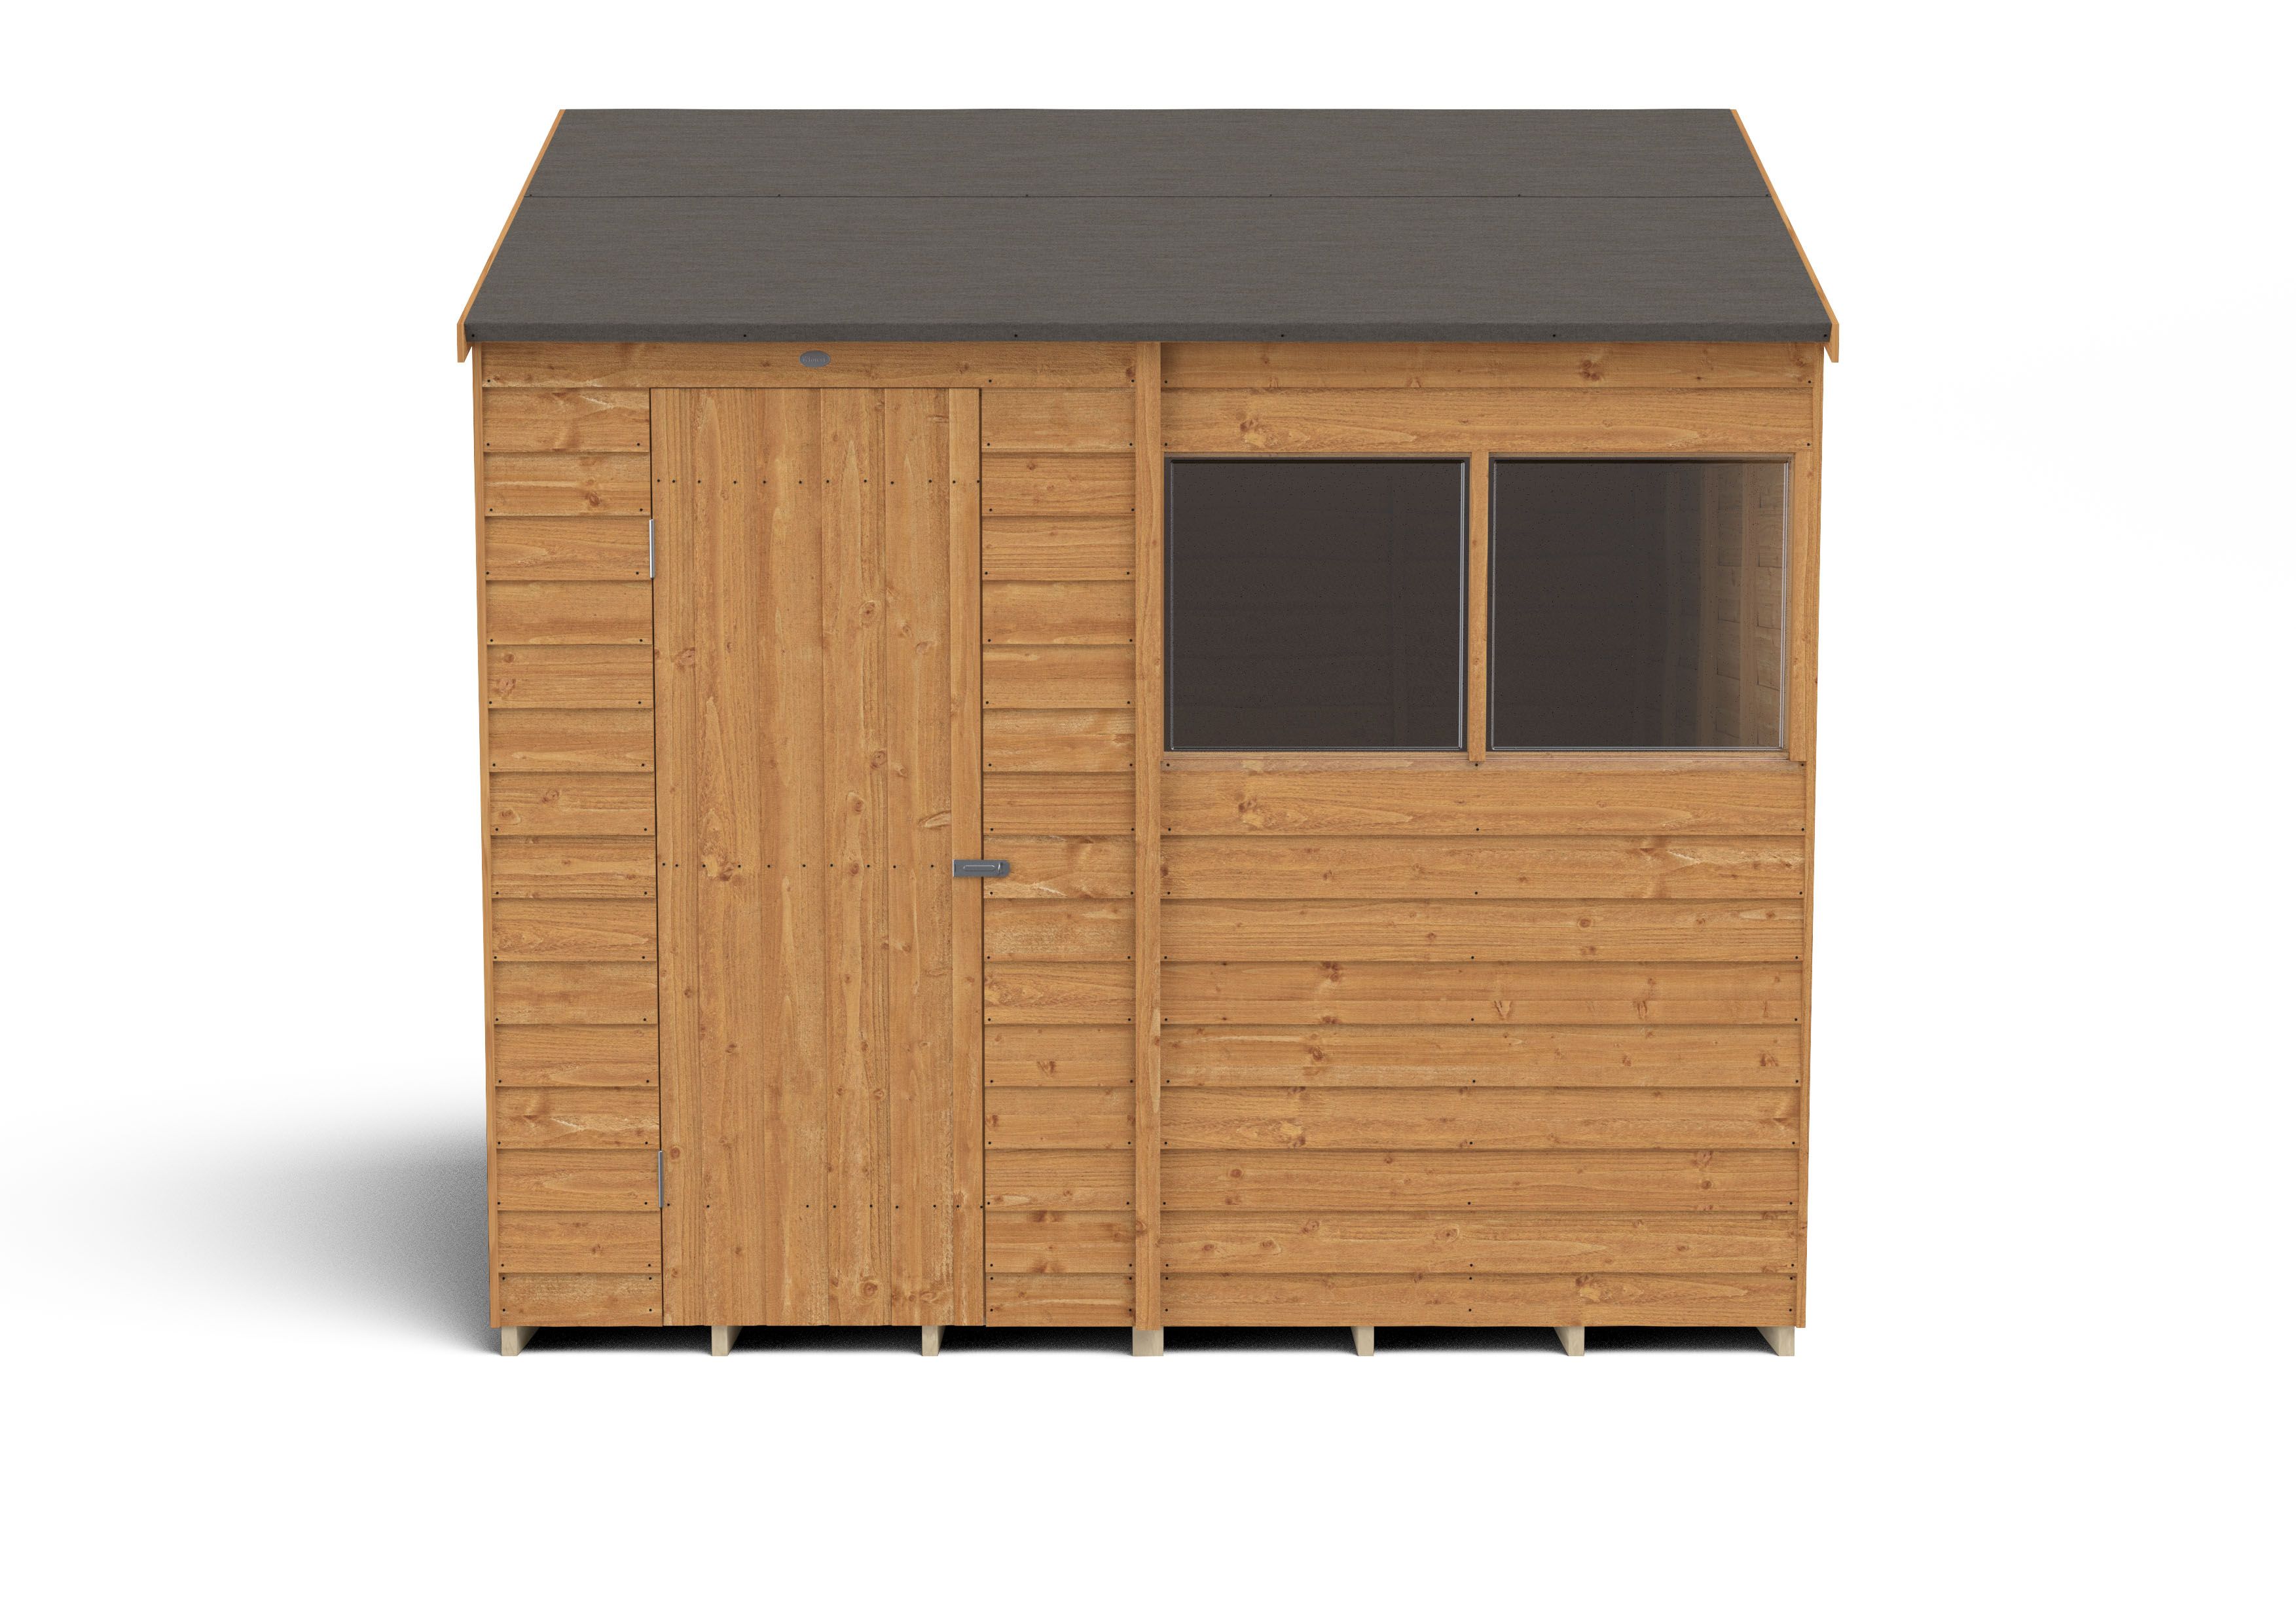 Forest Garden Overlap 8x6 ft Reverse apex Wooden Dip treated Shed with floor & 2 windows